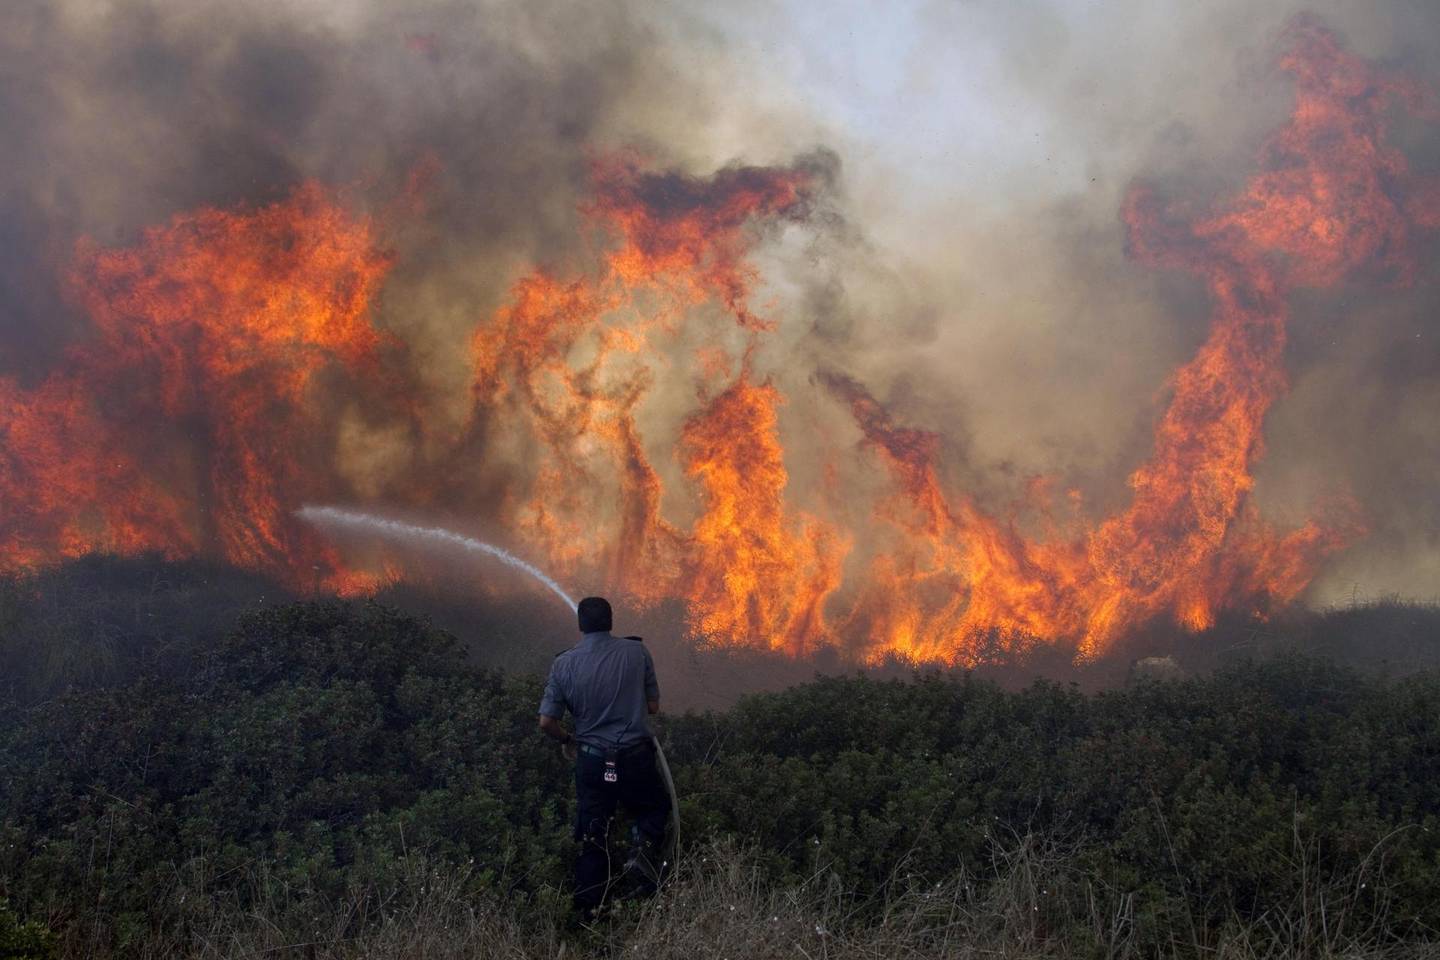 An Israeli fireman douses a brush fire in the vicinity of the Hadera power plant in northern of Israel, on September 7, 2011. AFP PHOTO/JACK GUEZ (Photo by JACK GUEZ / AFP)